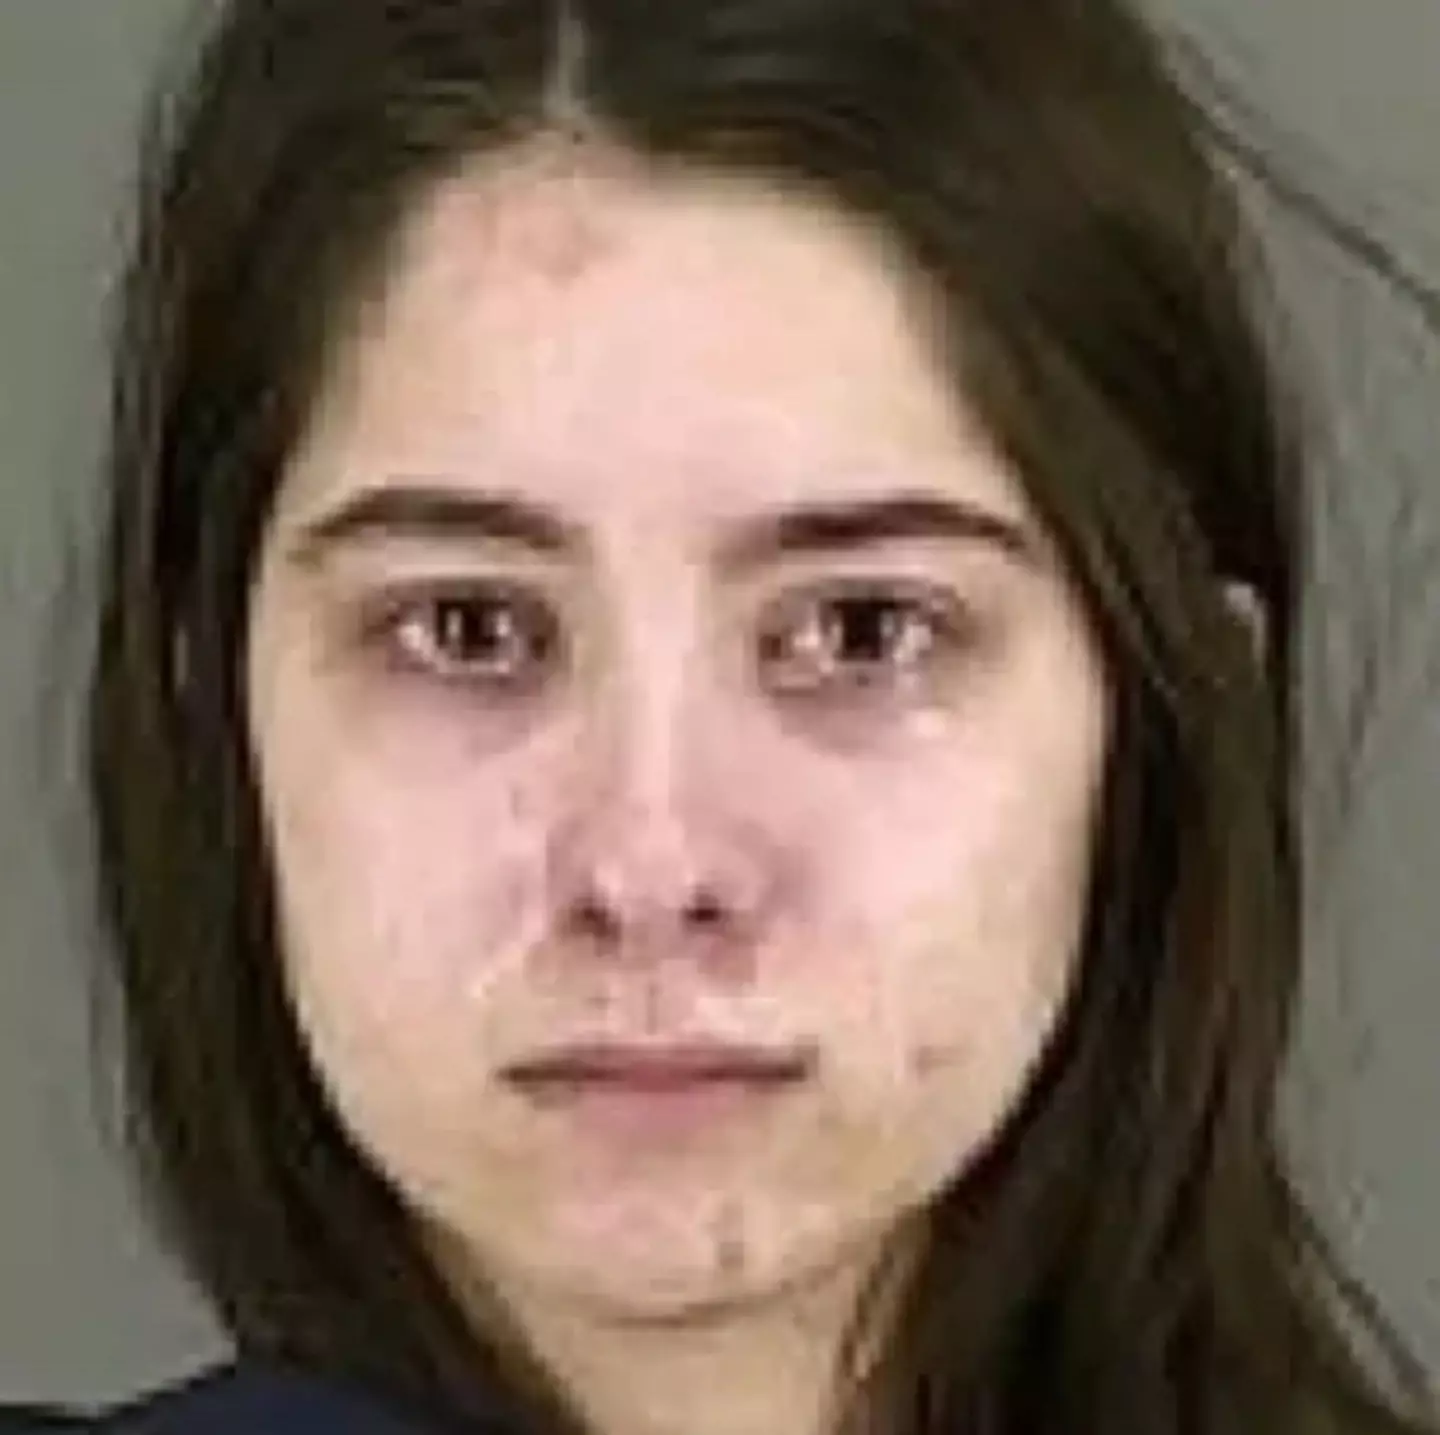 Sydney Powell was convicted of murdering her mother.